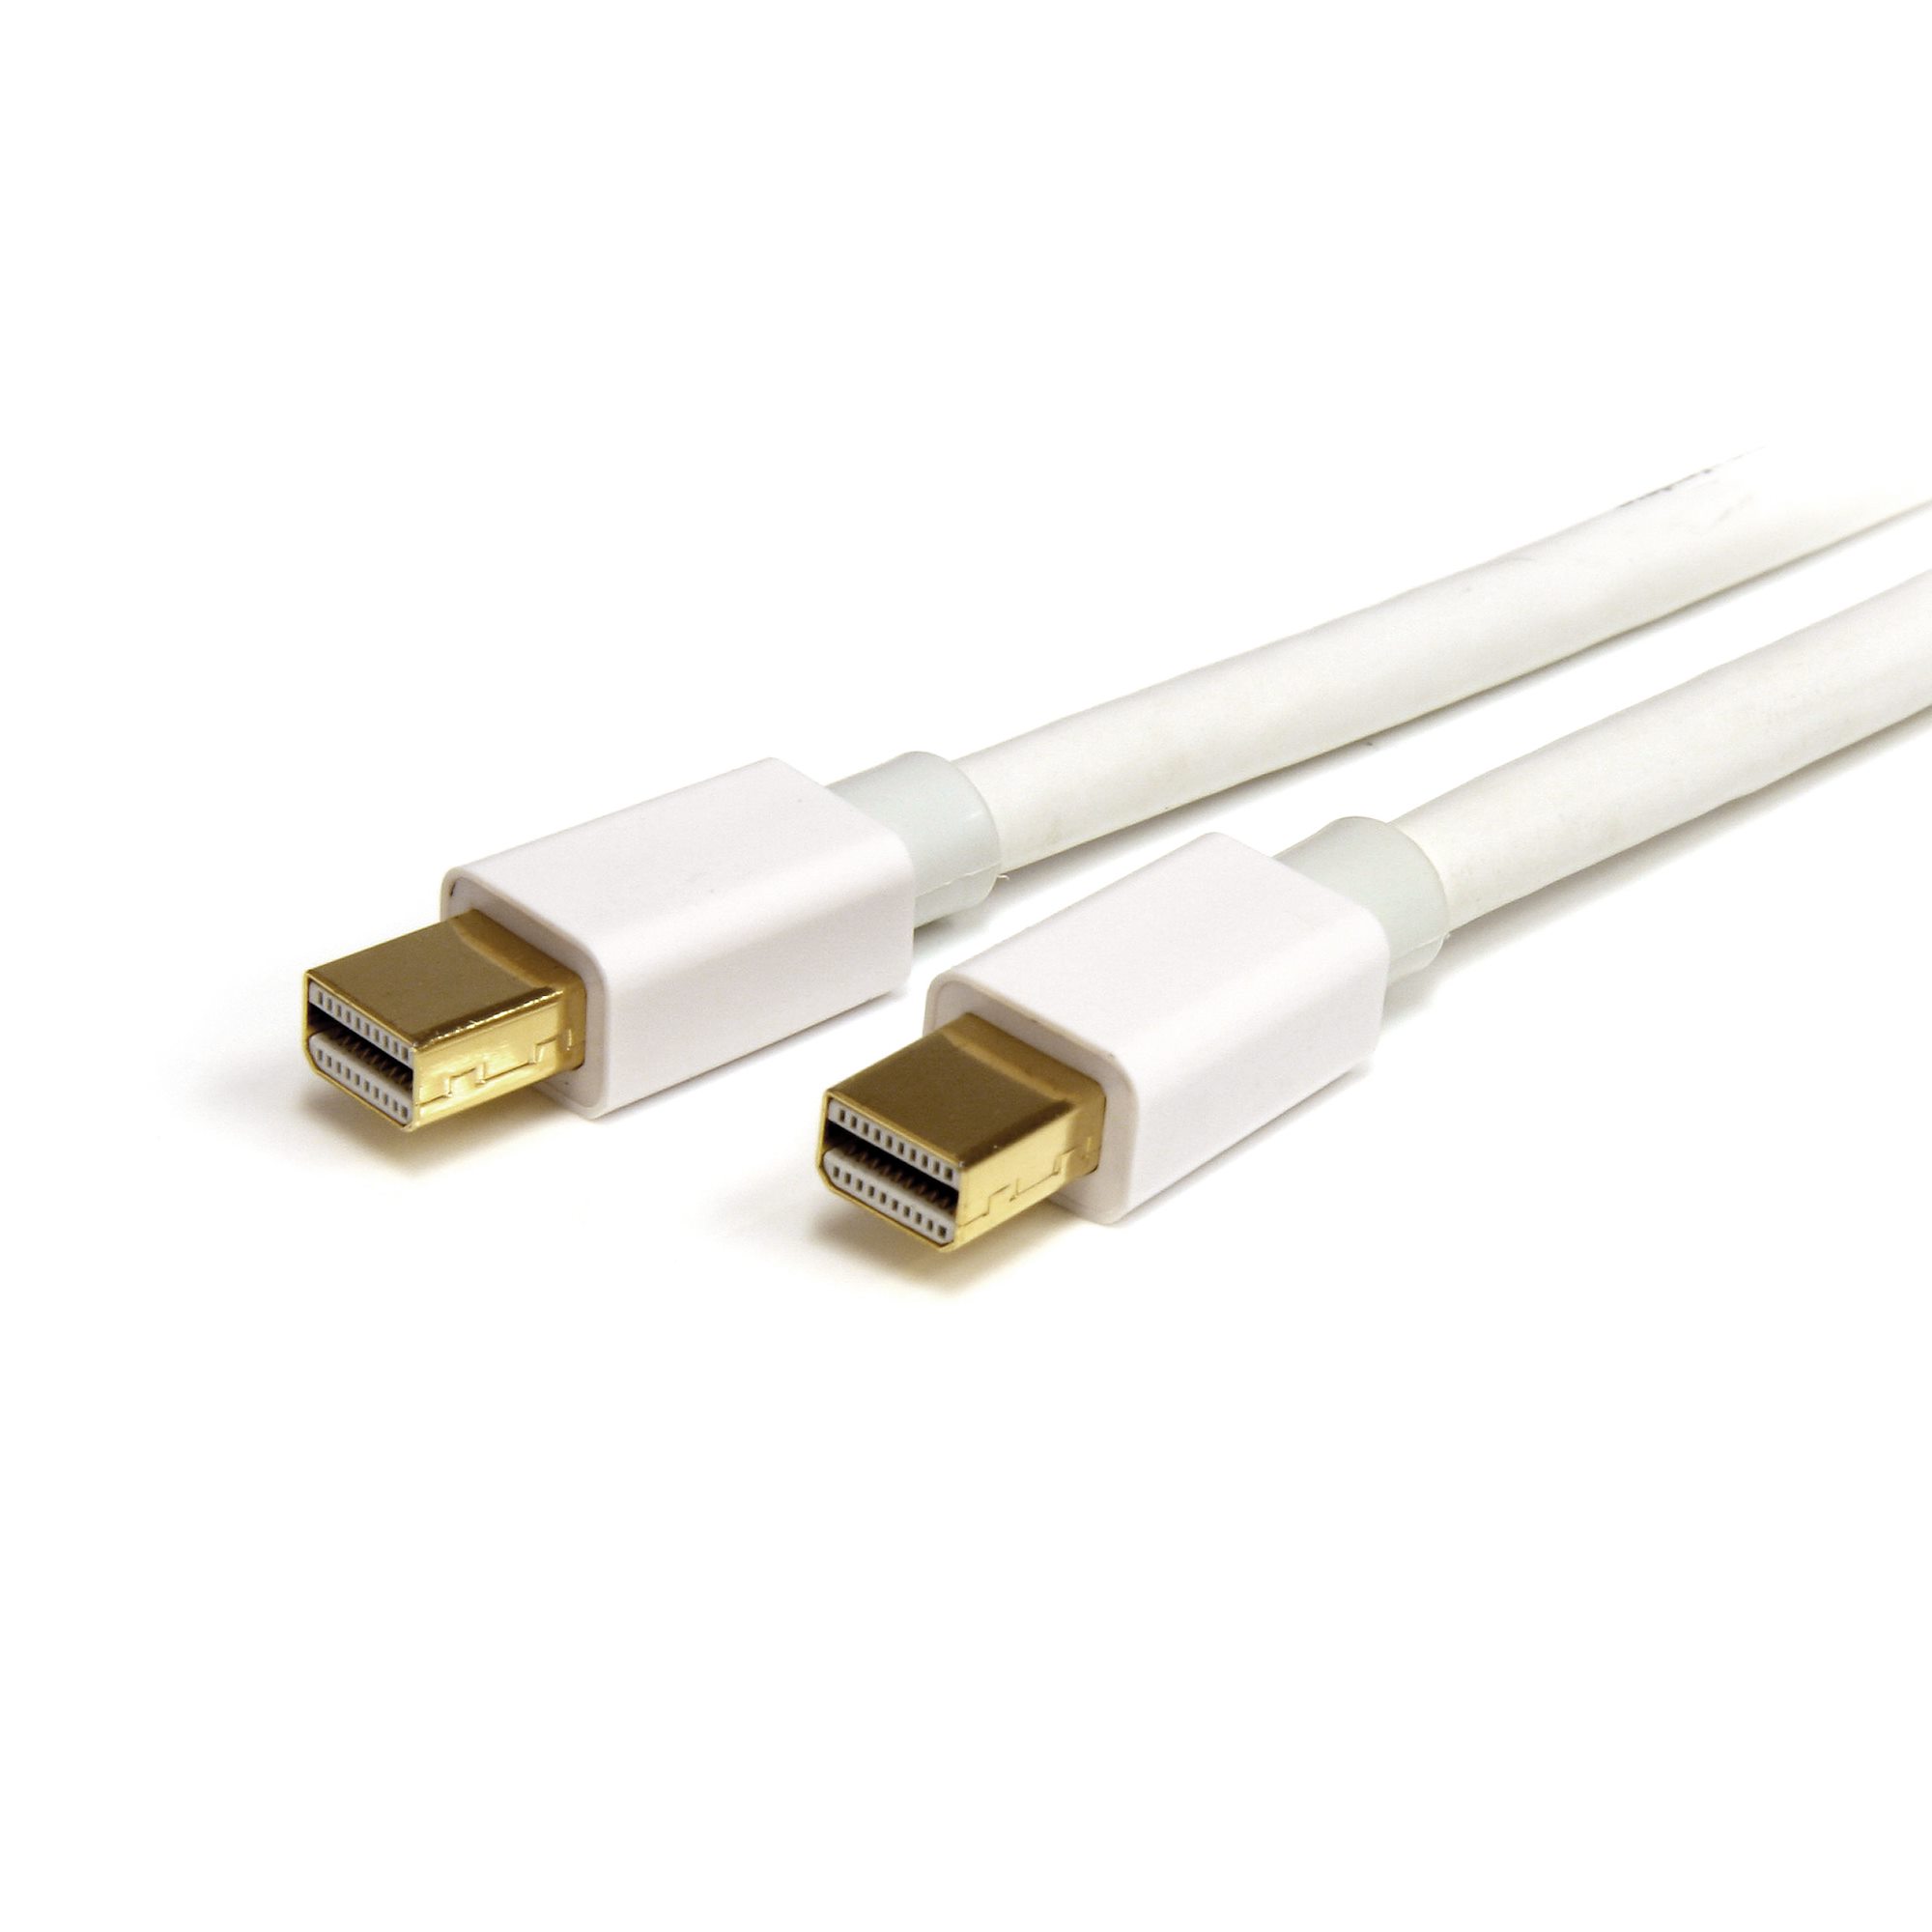 Cable Matters Certified Thunderbolt Cable in White 9.8 Feet Thunderbolt 2 Cable 